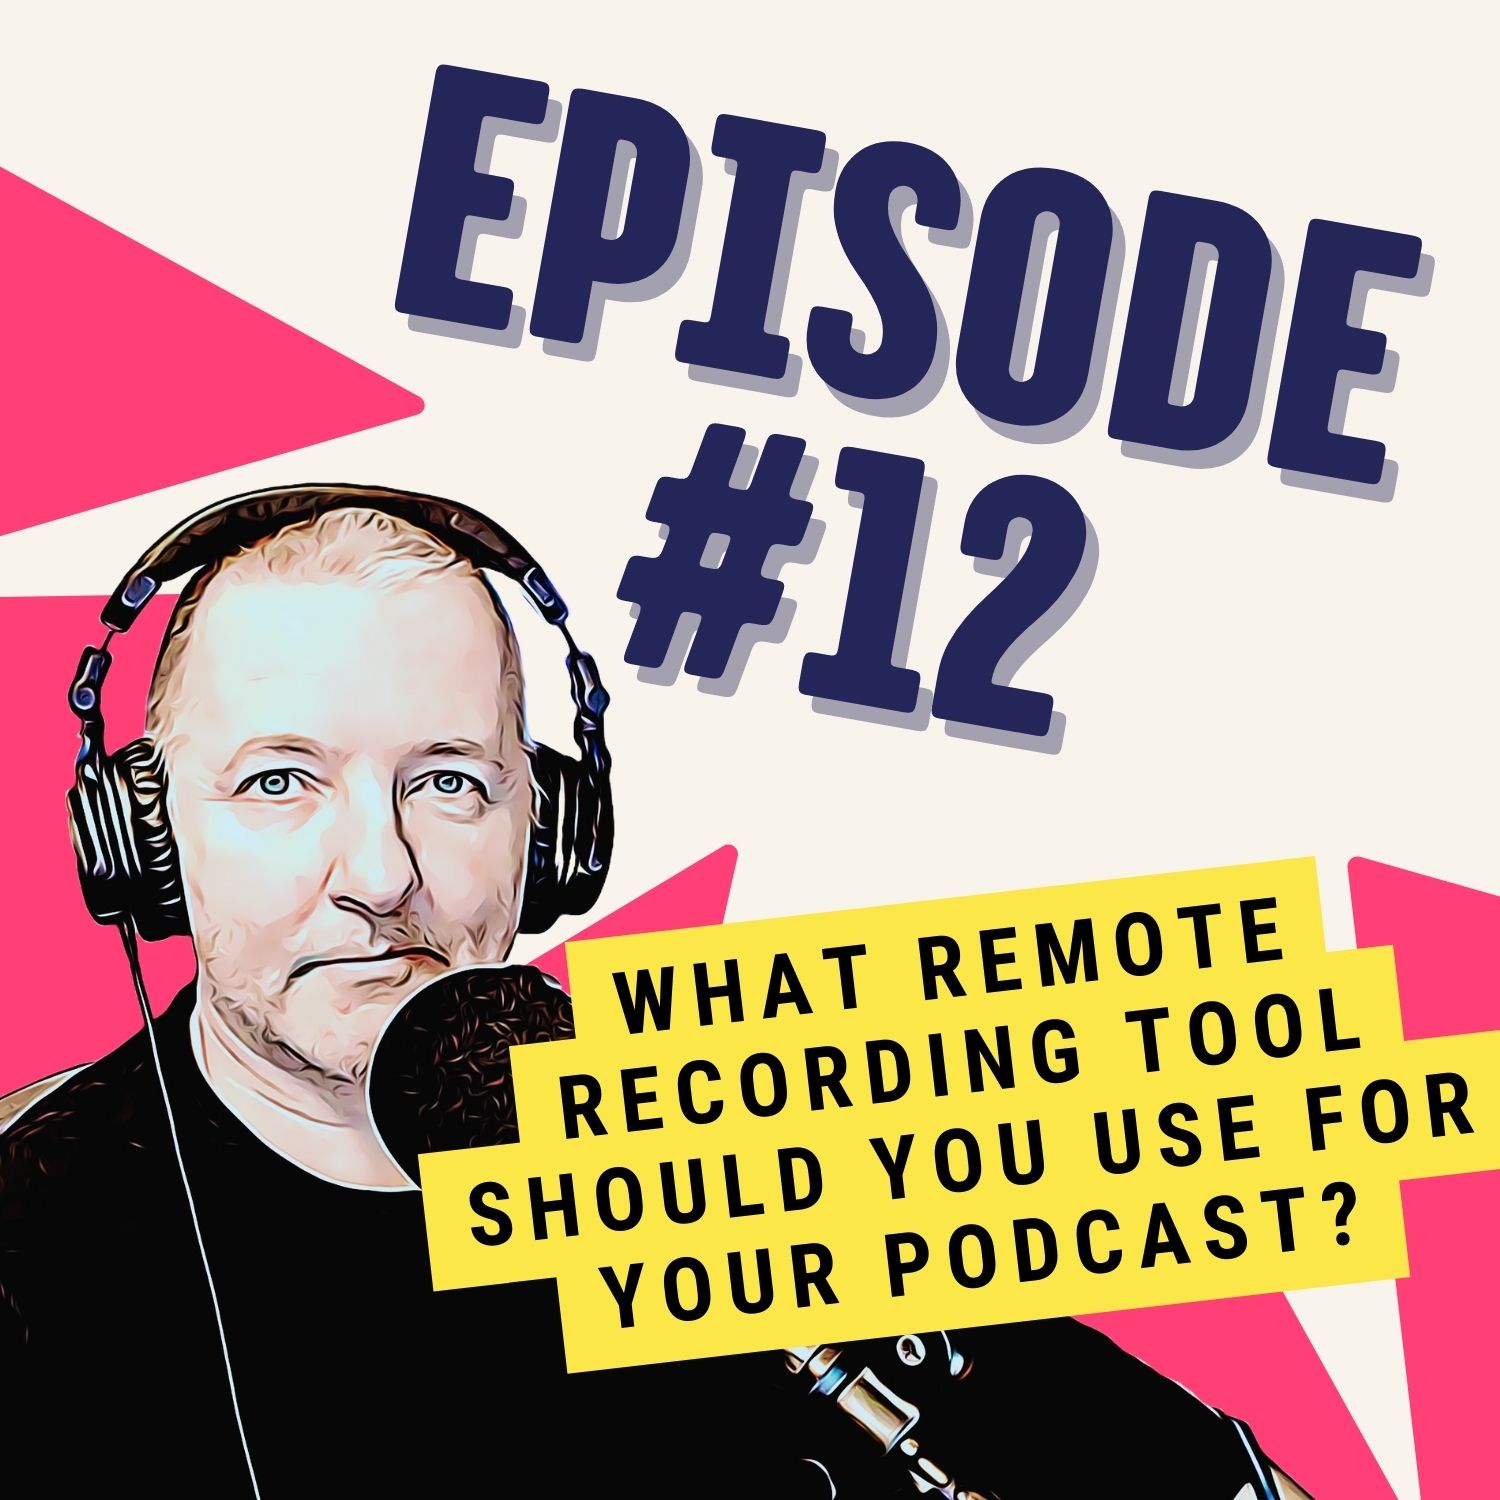 What Remote Recording Tool Should You Use for Your Podcast?